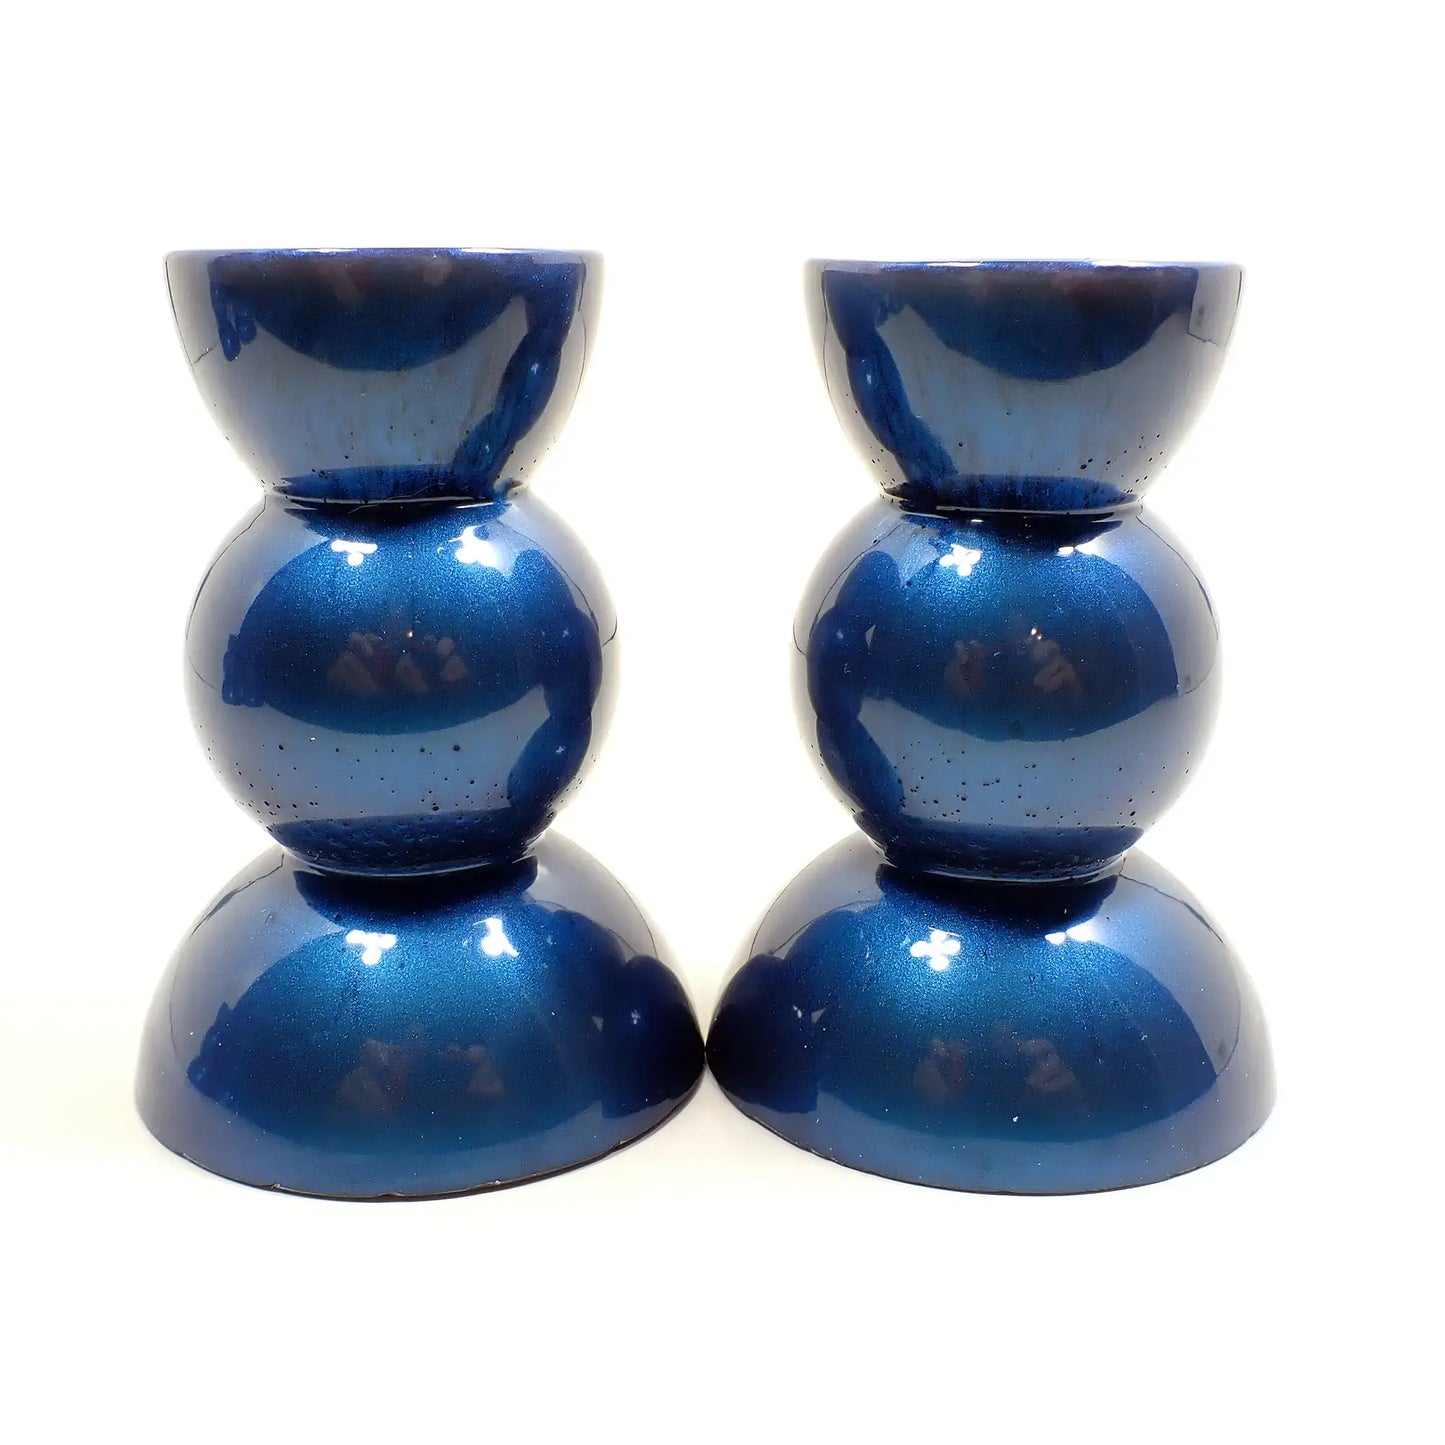 Set of Two Handmade Pearly Deep Blue Resin Rounded Geometric Candlestick Holders